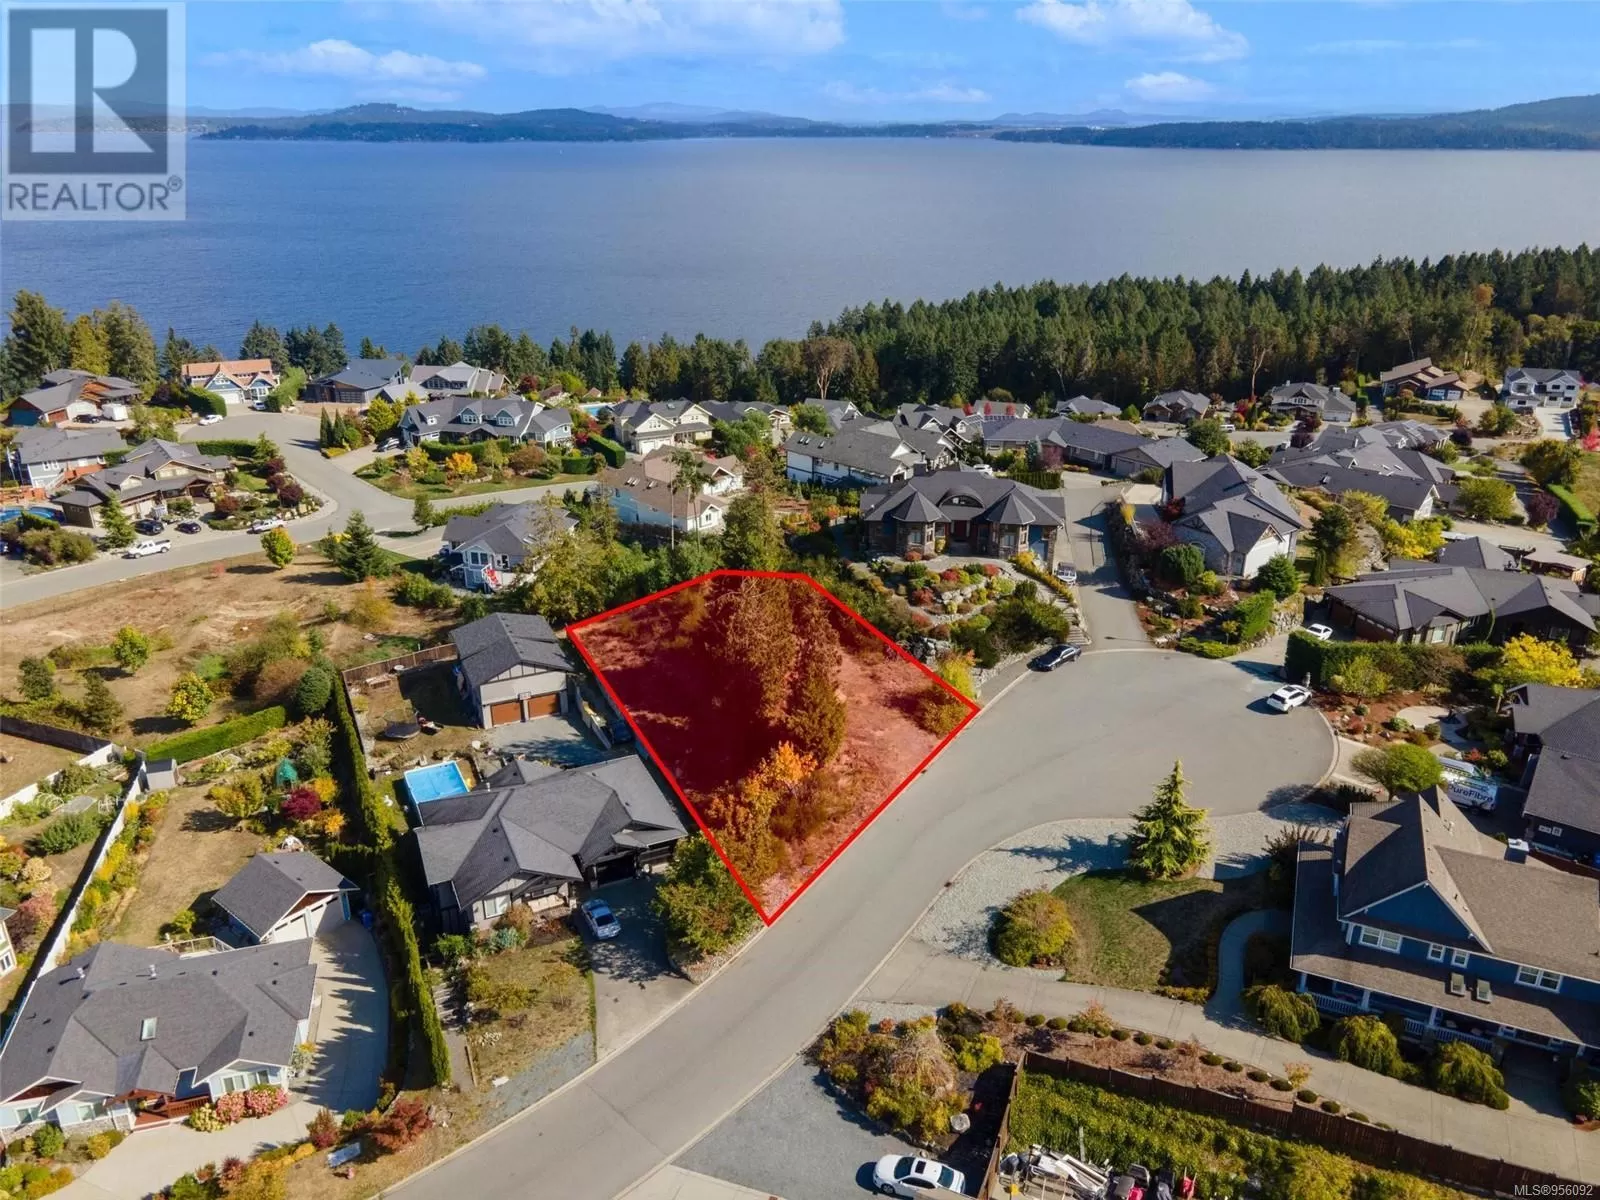 Lot 48 Coopers Hawk Rise, Mill Bay, British Columbia V0R 2P7